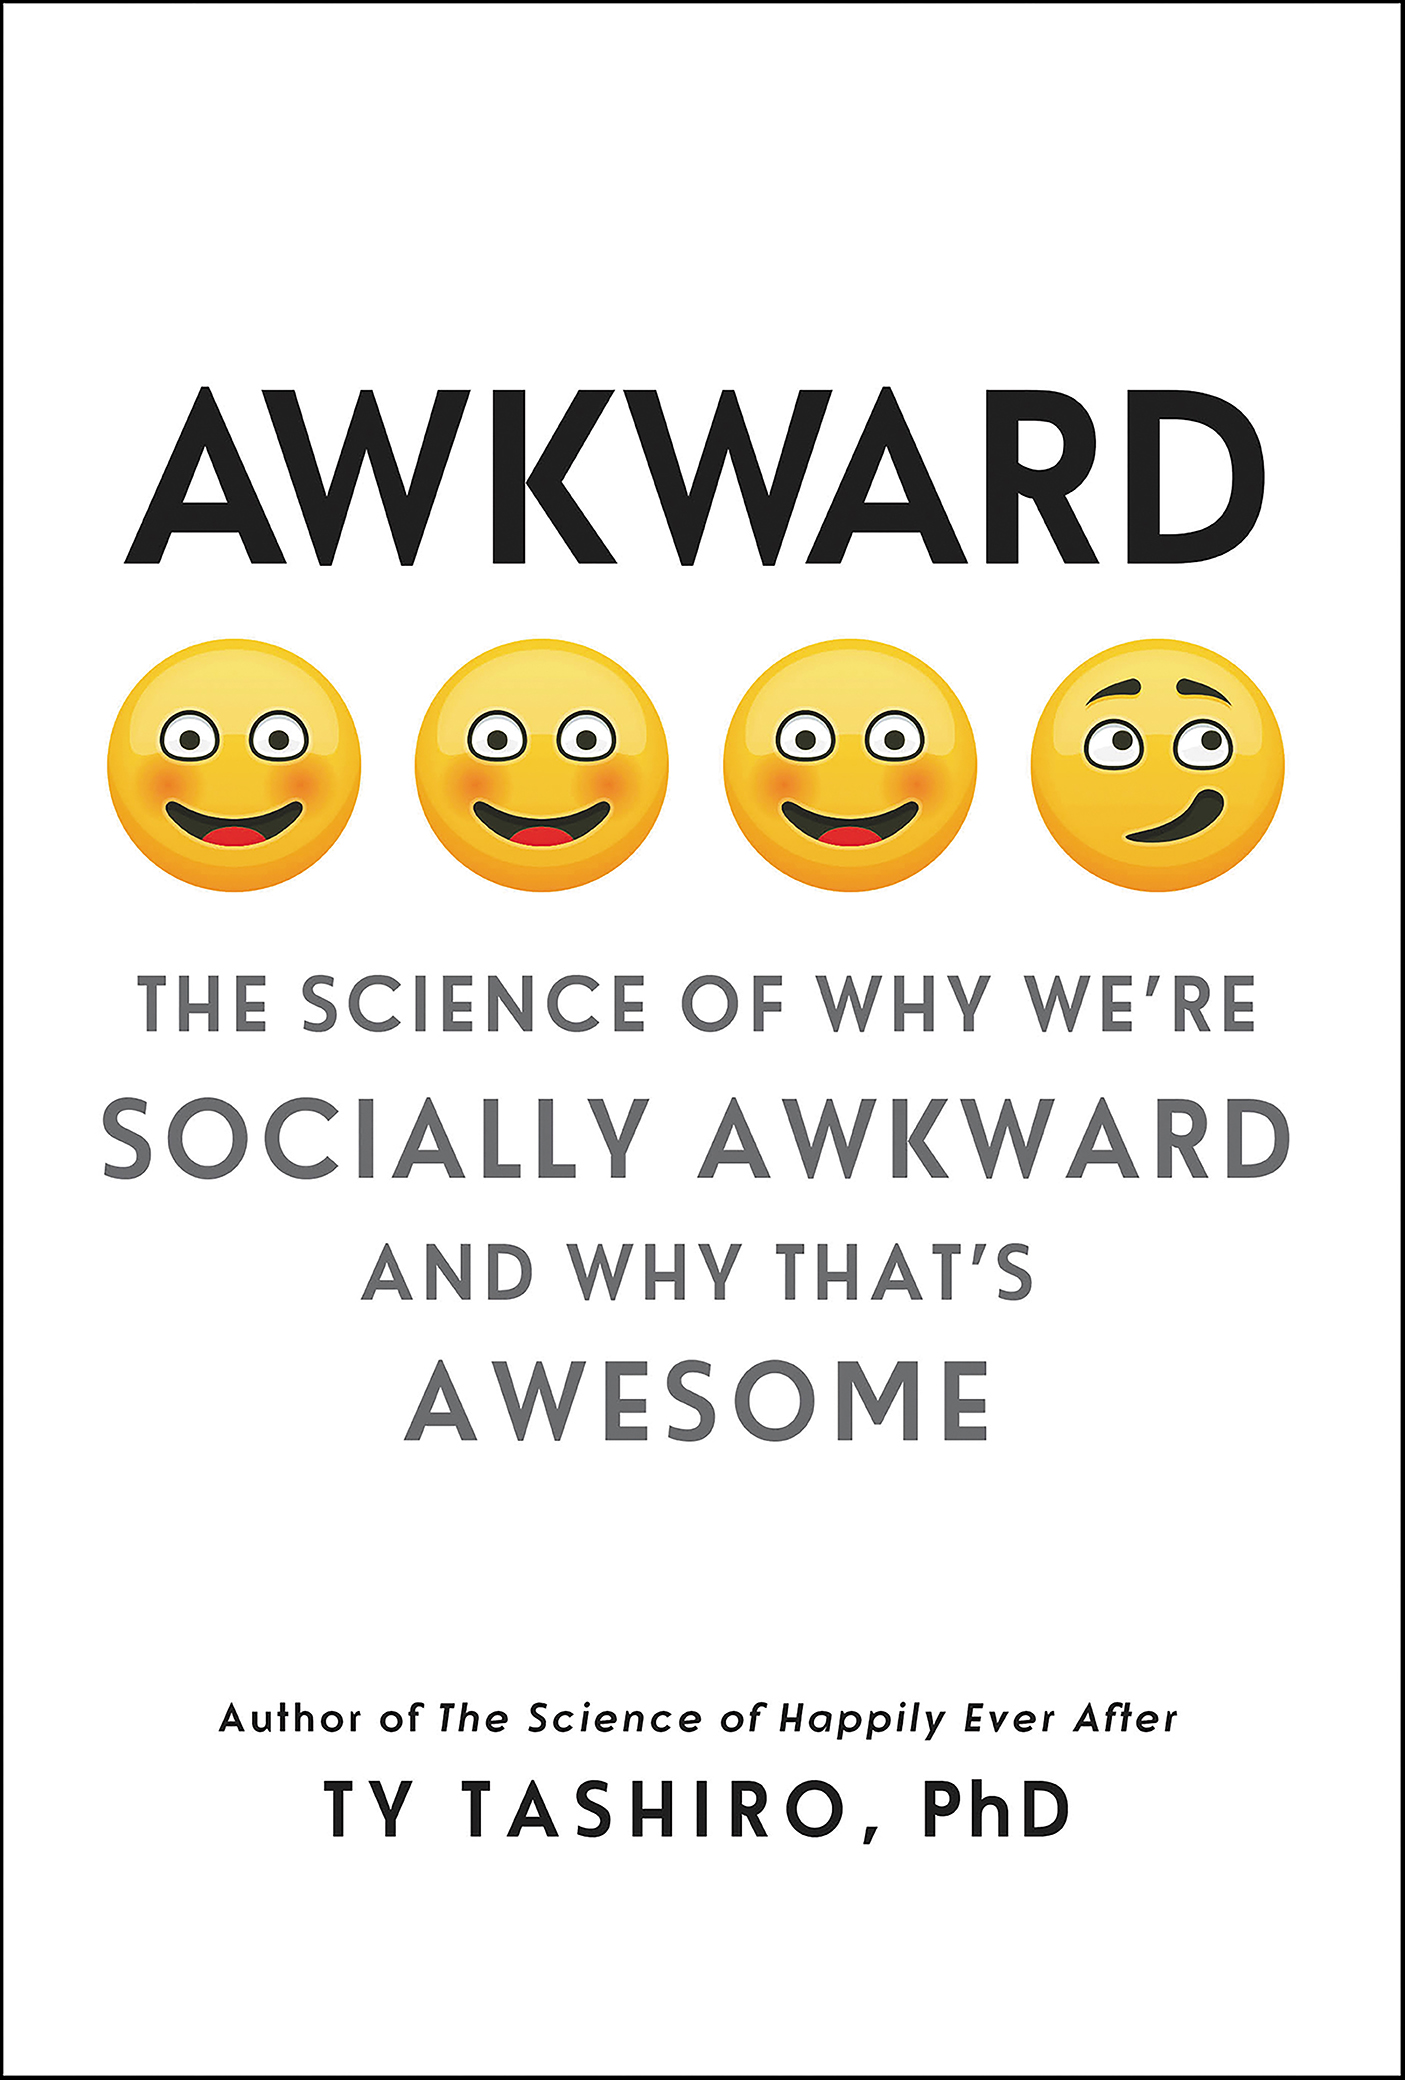 Awkward the science of why we're socially awkward and why that's awesome cover image